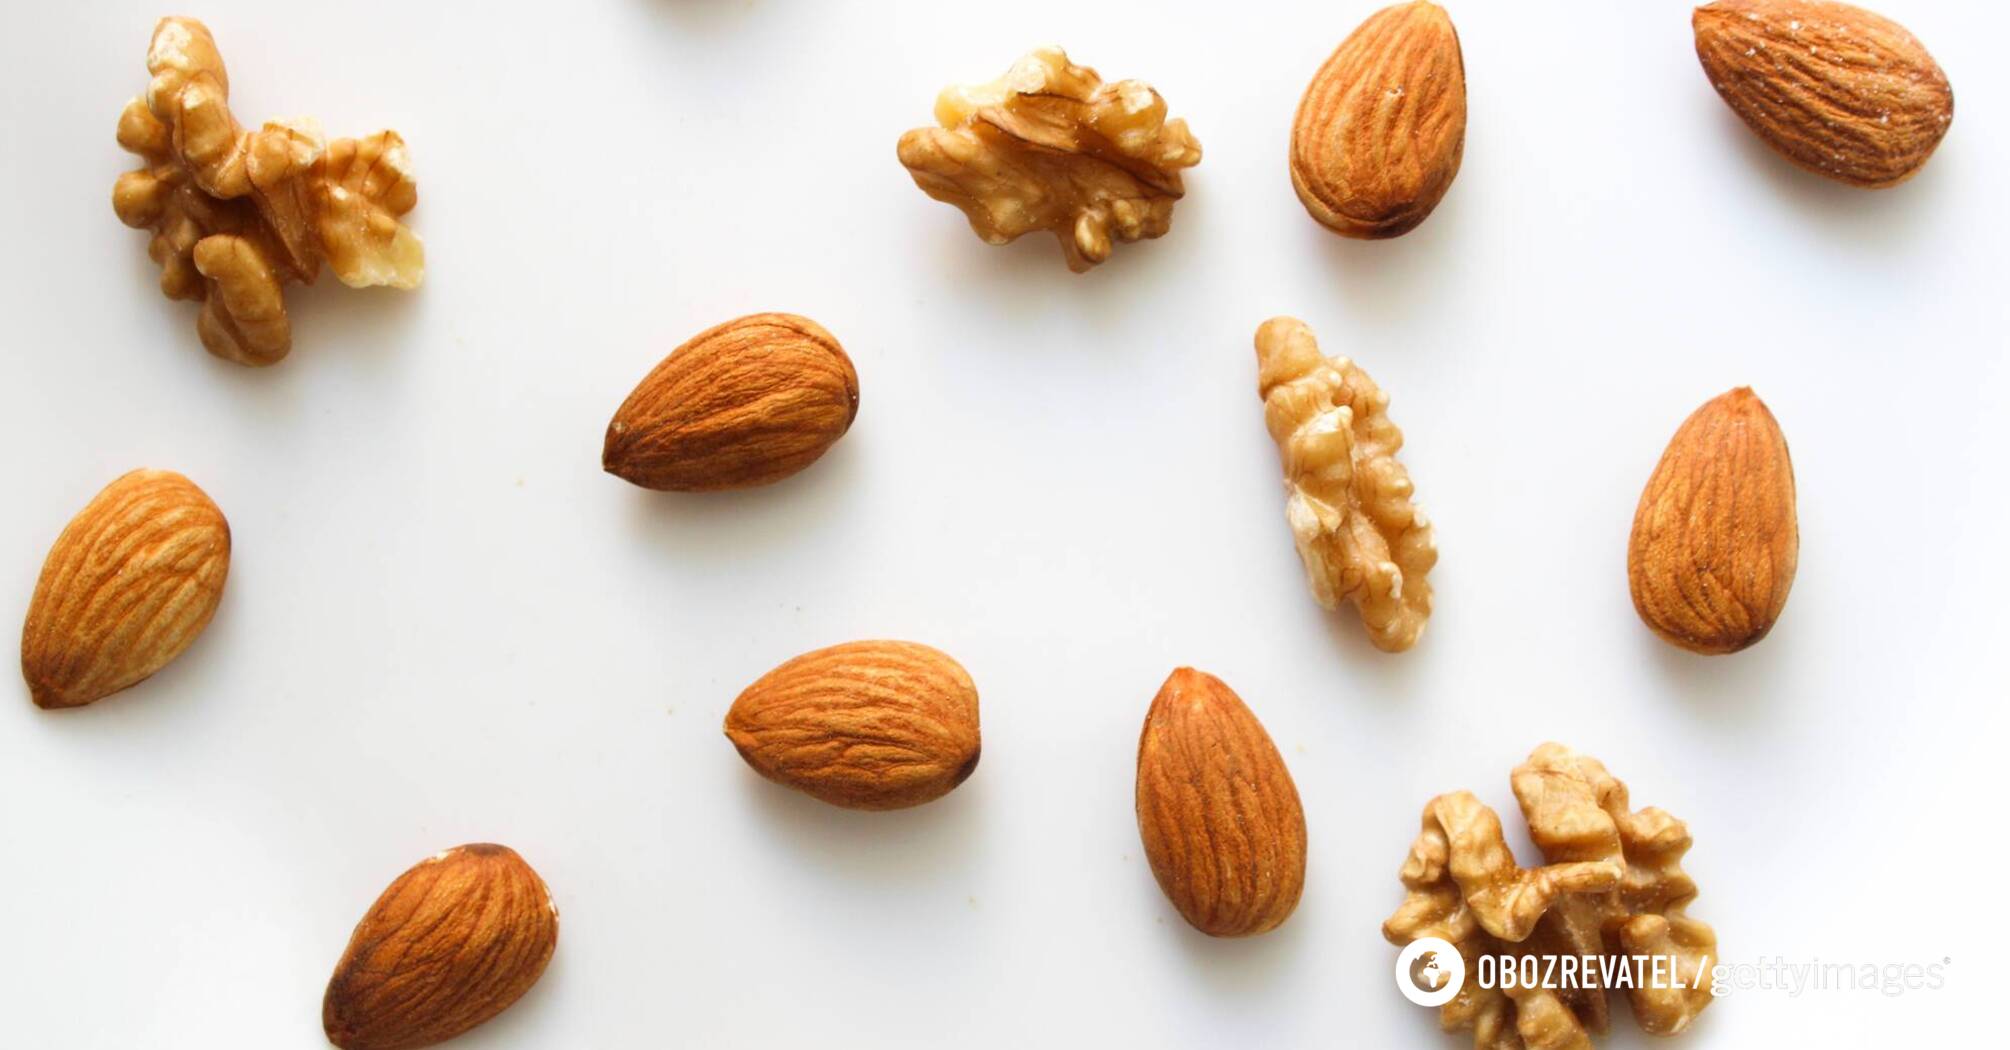 Walnuts and almonds help lower bad cholesterol